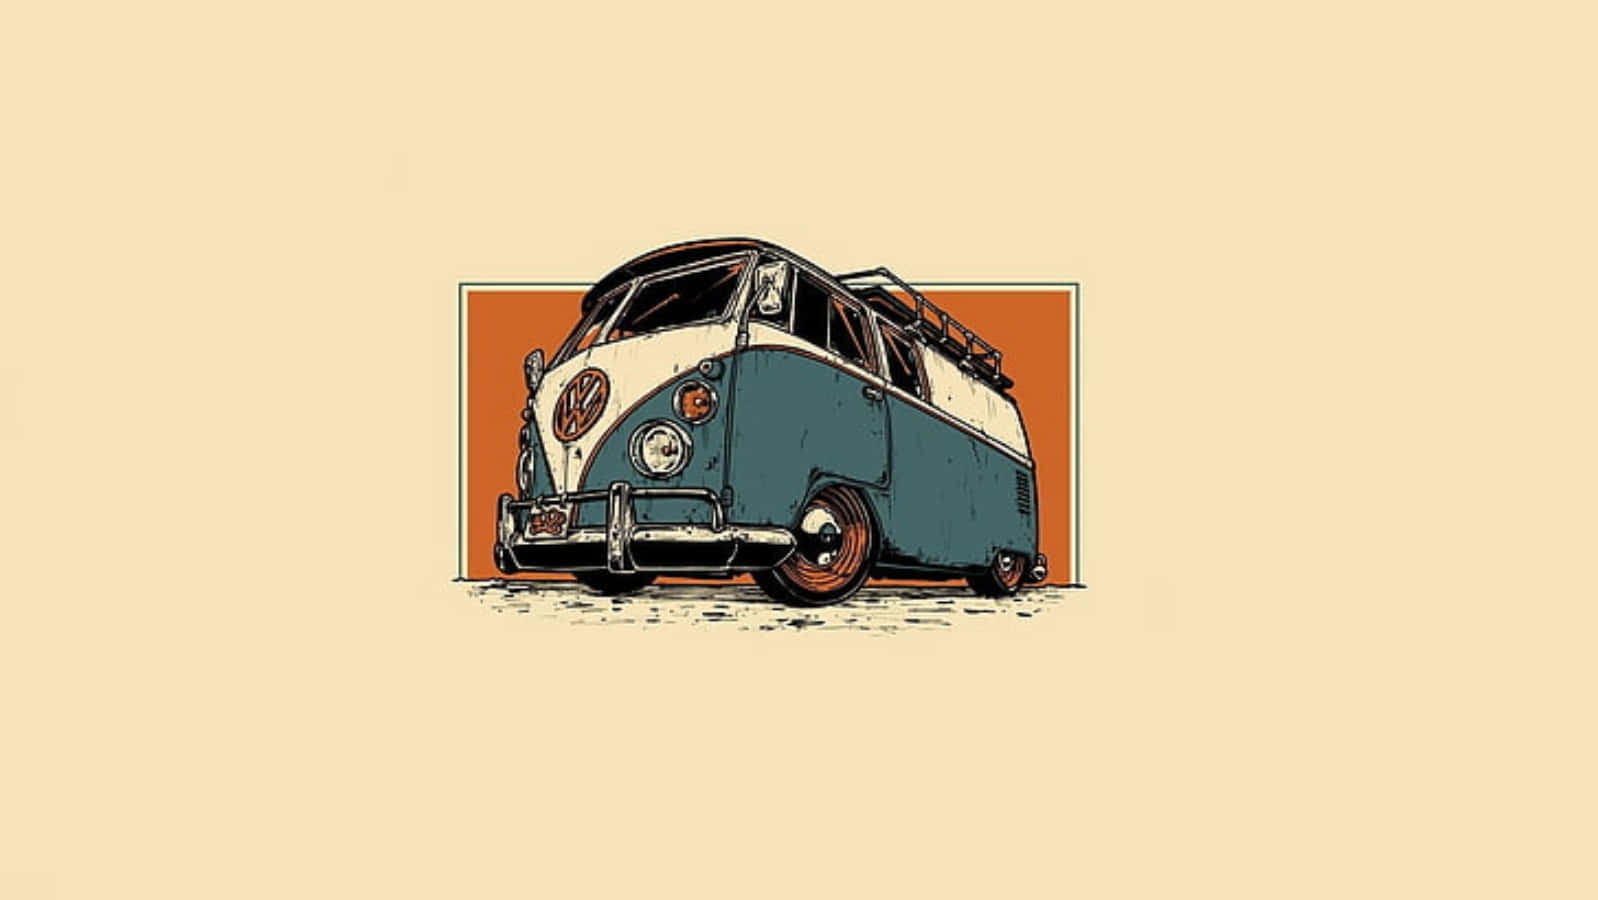 A Vintage Vw Bus On A Brown Background